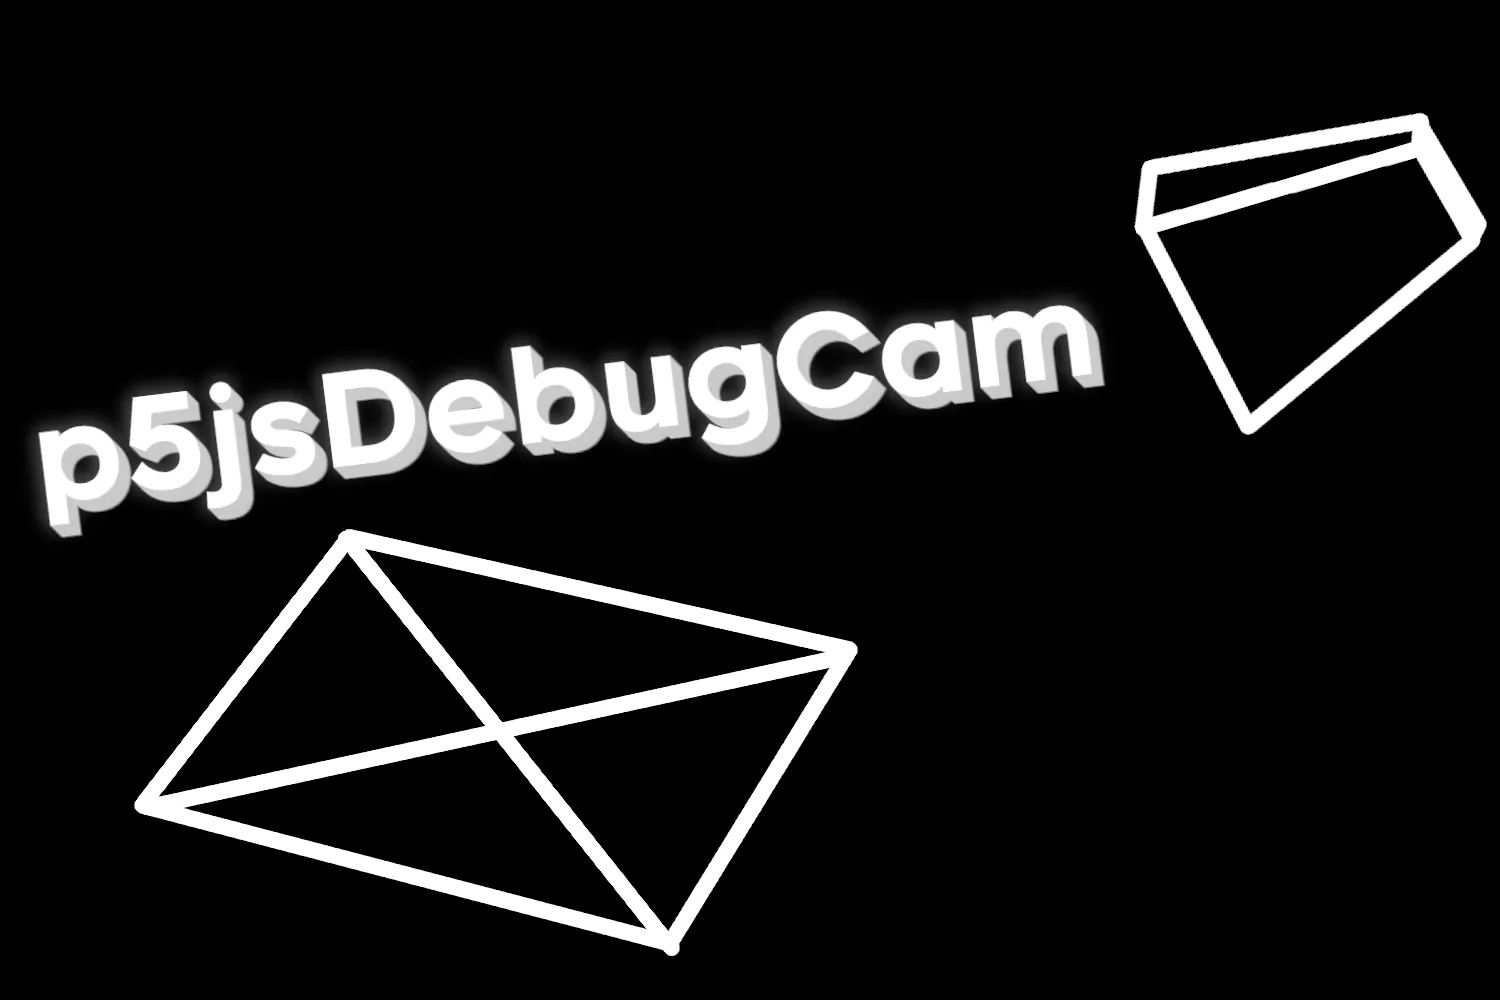 An image of a wireframe platform with the 3d word "p5jsDebugCam" floating on top of it and a debug camera pointed and looking at both